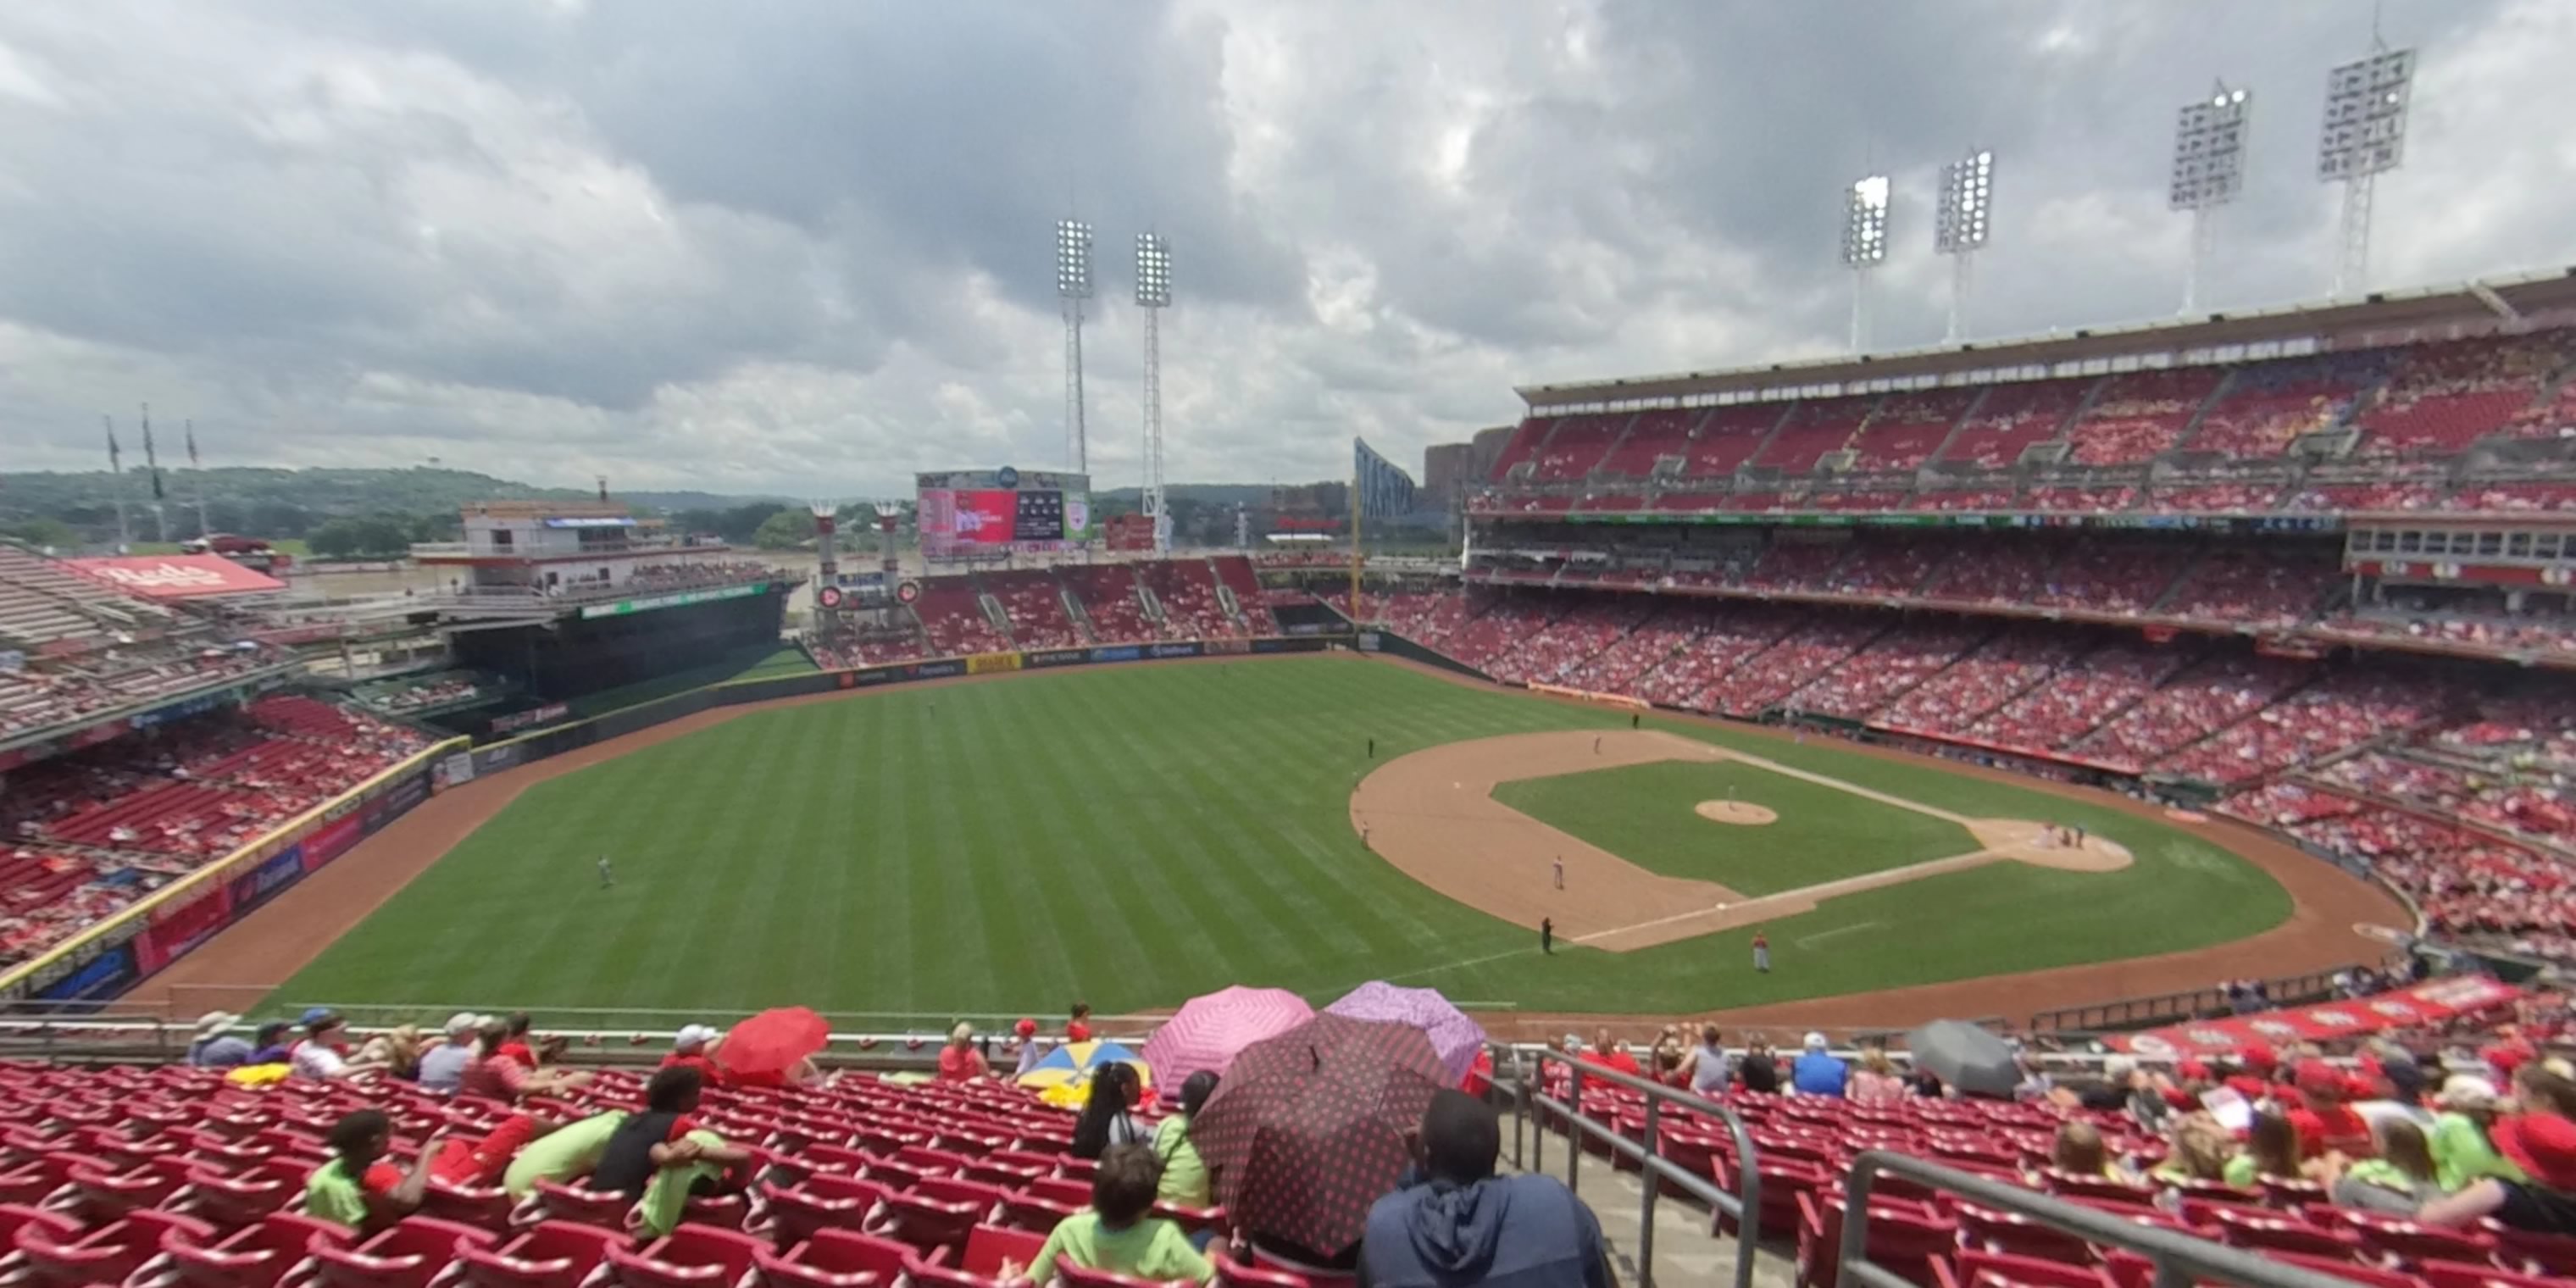 Section 414 at Great American Ball Park 